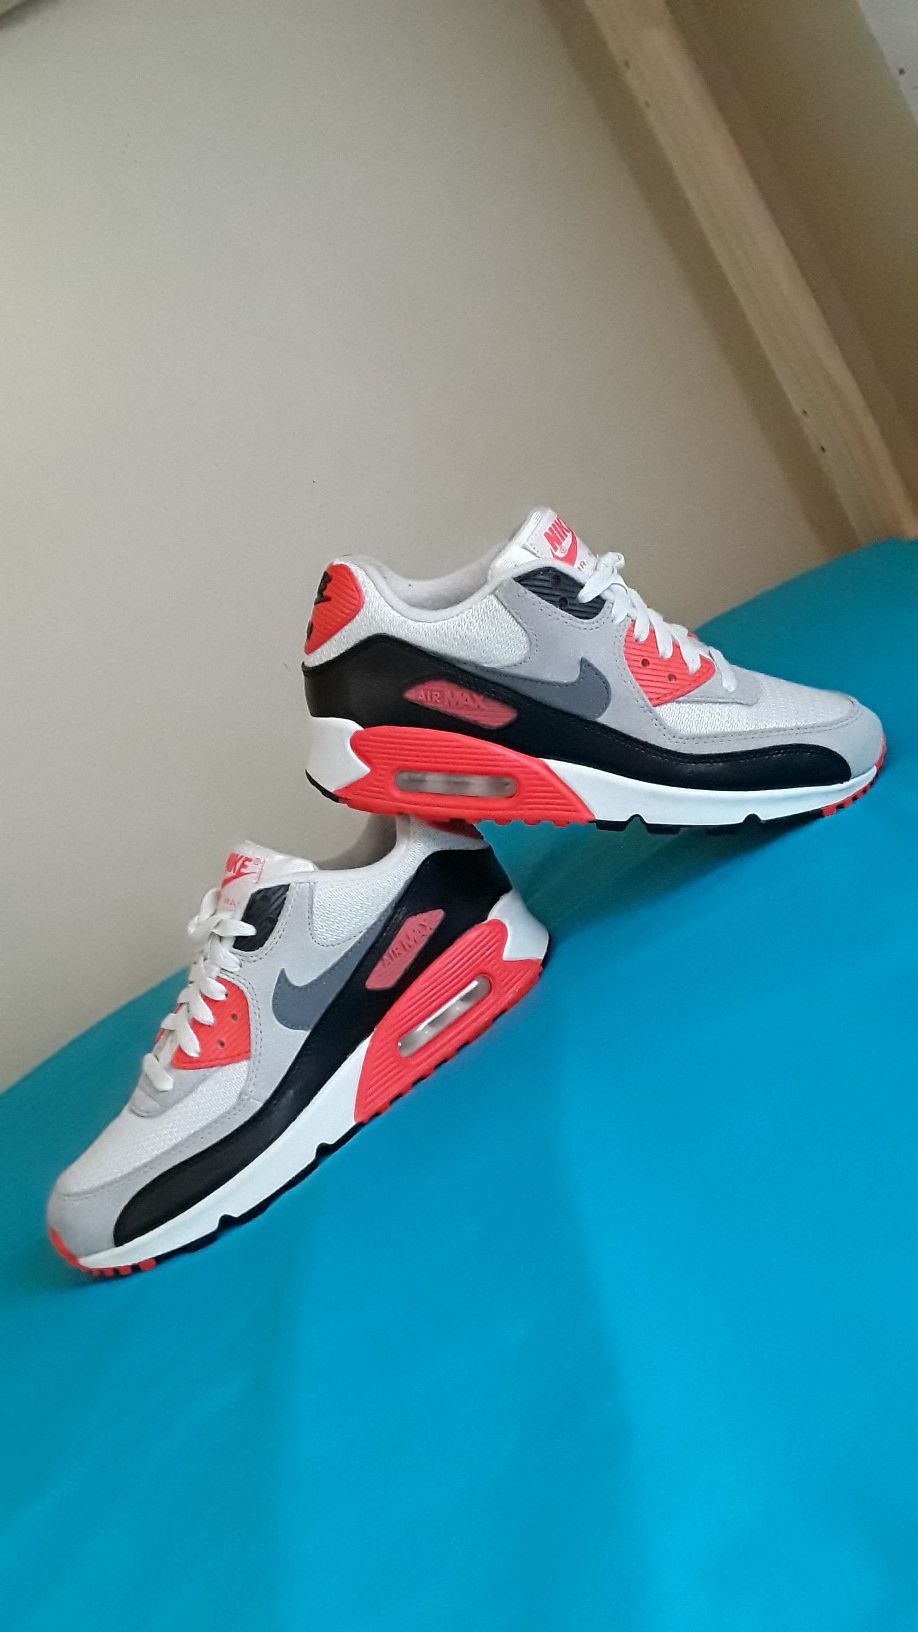 Nike Air Max 90 Infrared Size 8 WOMEN and Size 6.5 MEN and 6.5Y